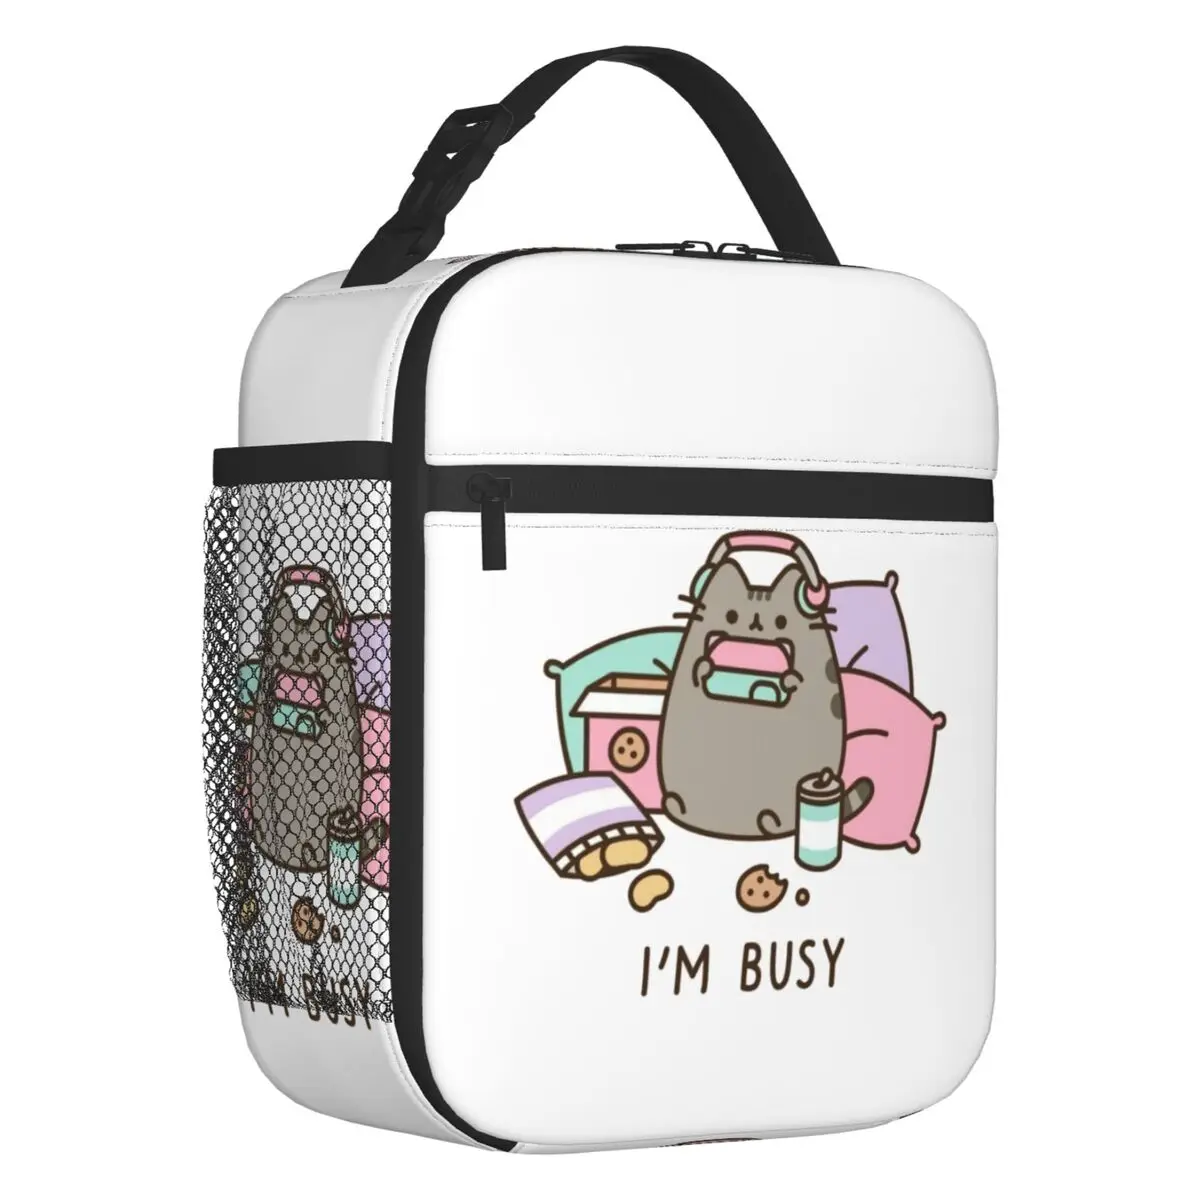 Catroon Pusheens Tabby Cat Portable Lunch Box Women Multifunction Thermal Cooler Food Insulated Lunch Bag Office Work